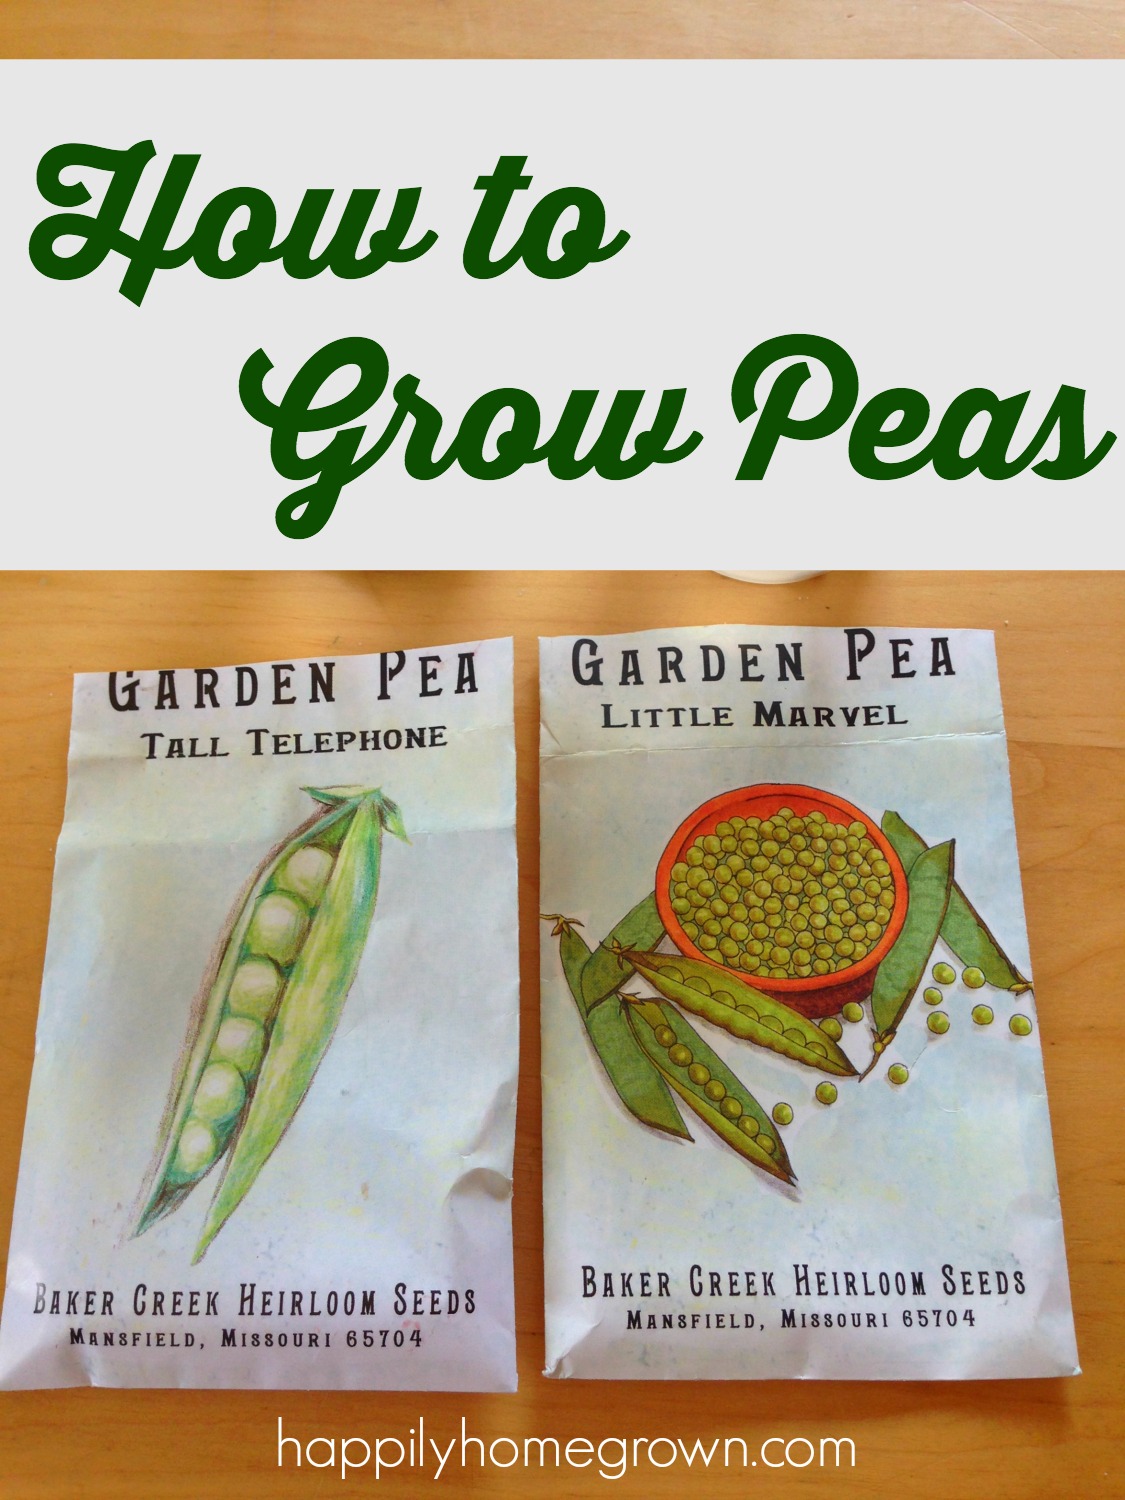 Peas are one of the earliest spring vegetables. They are easy to grow, and now is the perfect time to get them in the ground!